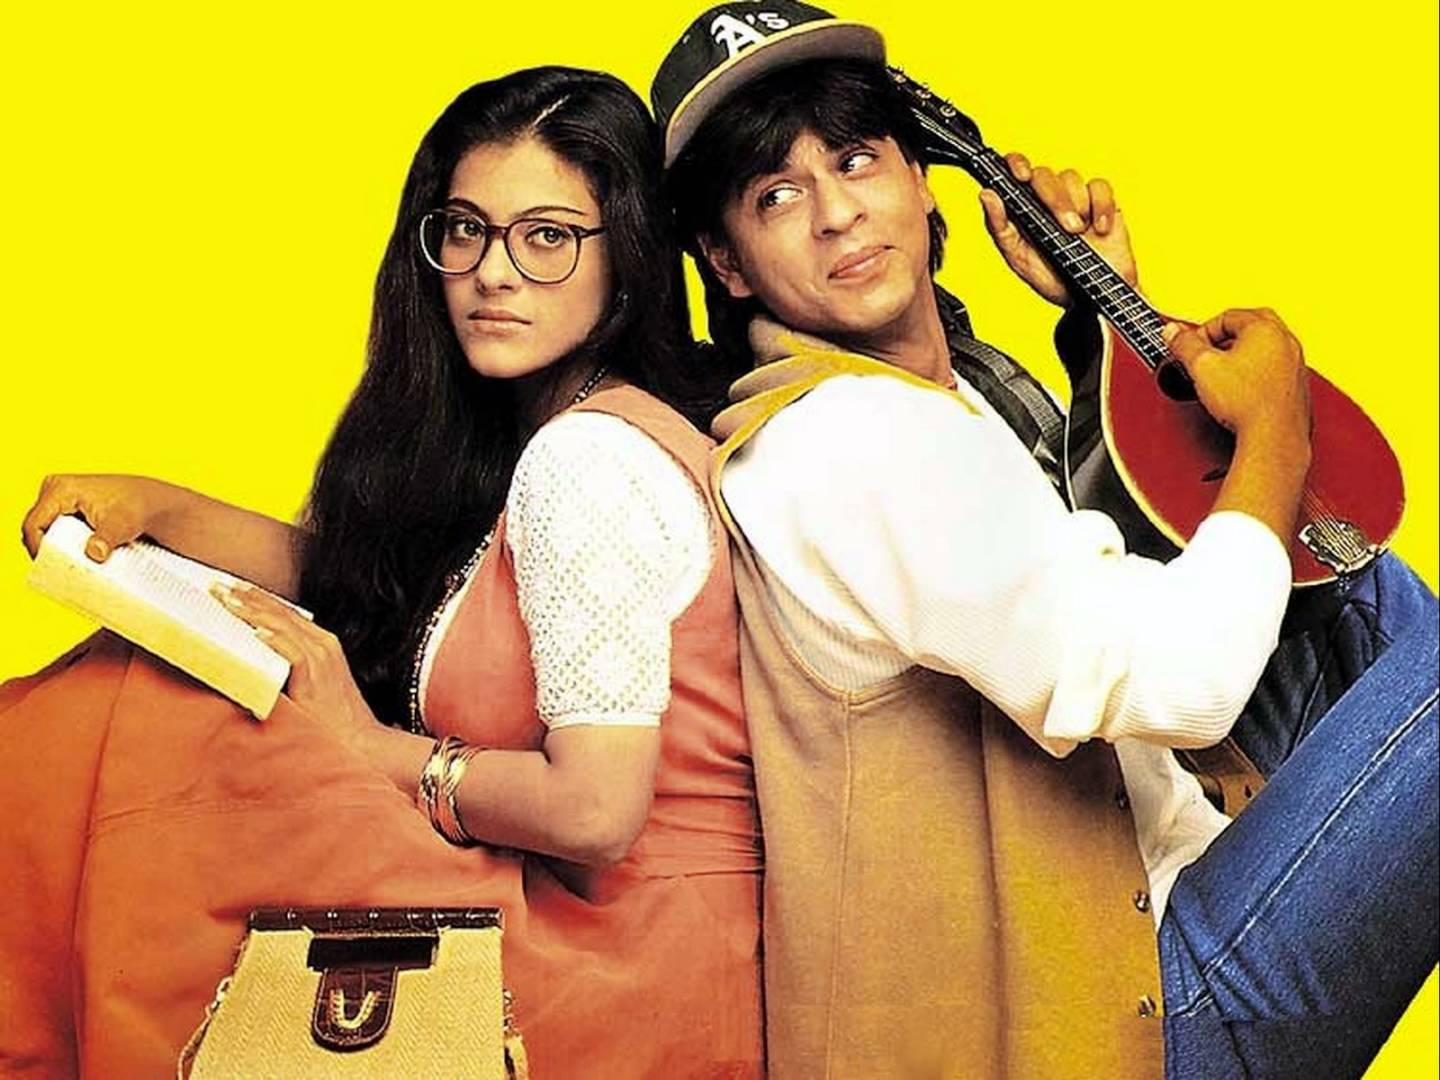 dilwale dulhania le jayenge mp4 movie free download